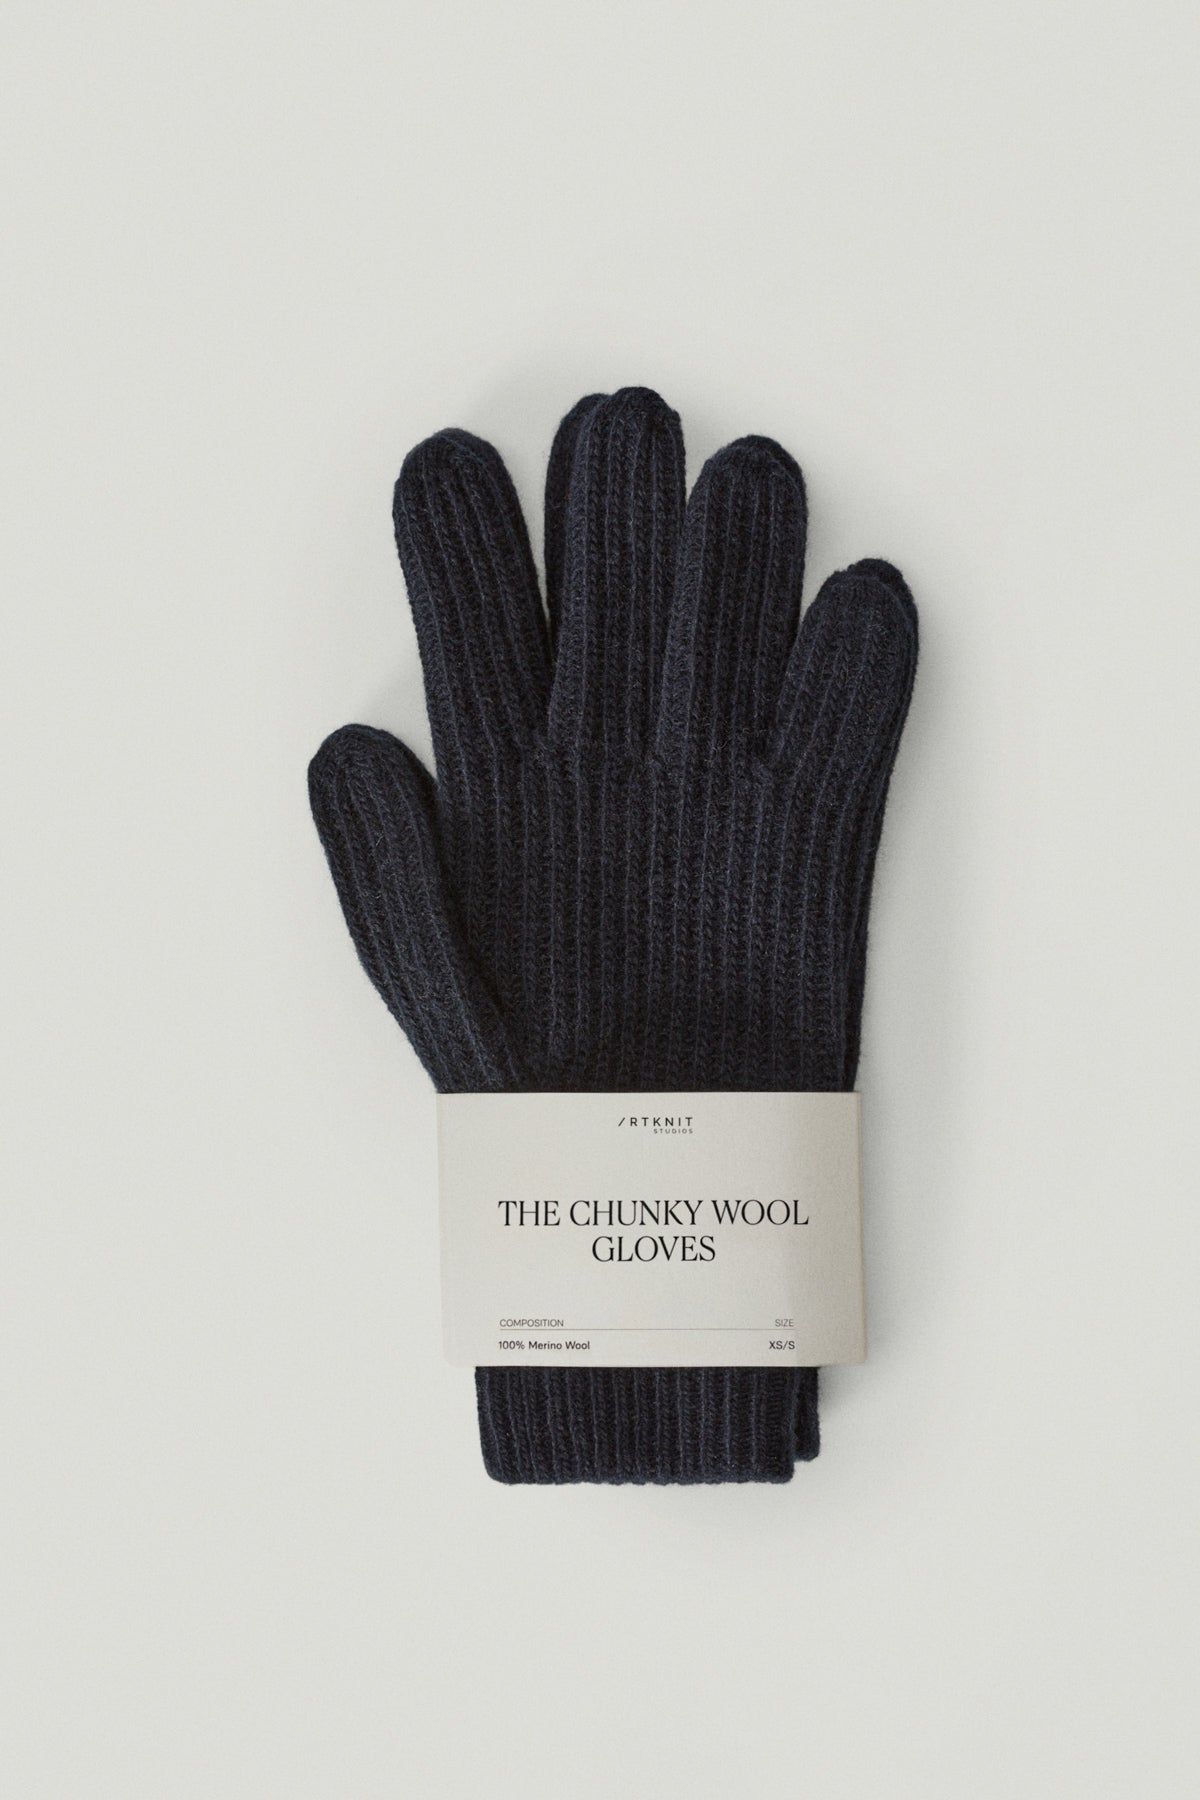 copy of the woolen ribbed gloves blue navy